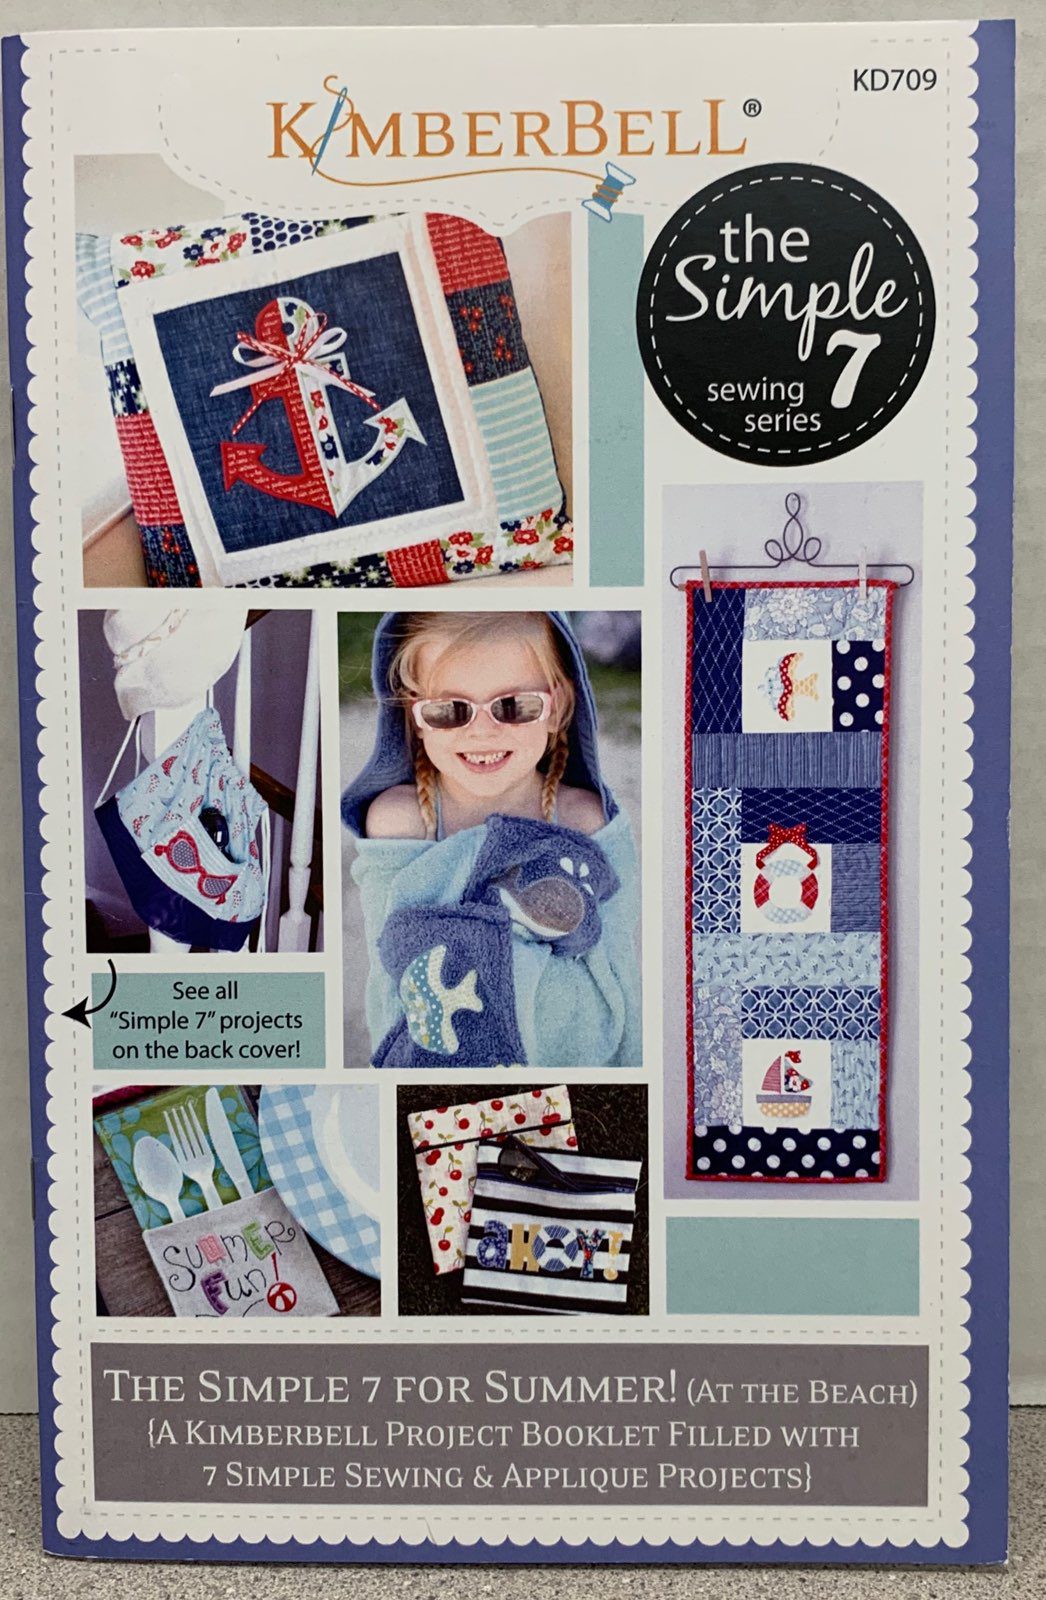 Kimberbell - The Simple 7 For Summer! (at the beach) - Sewing Series